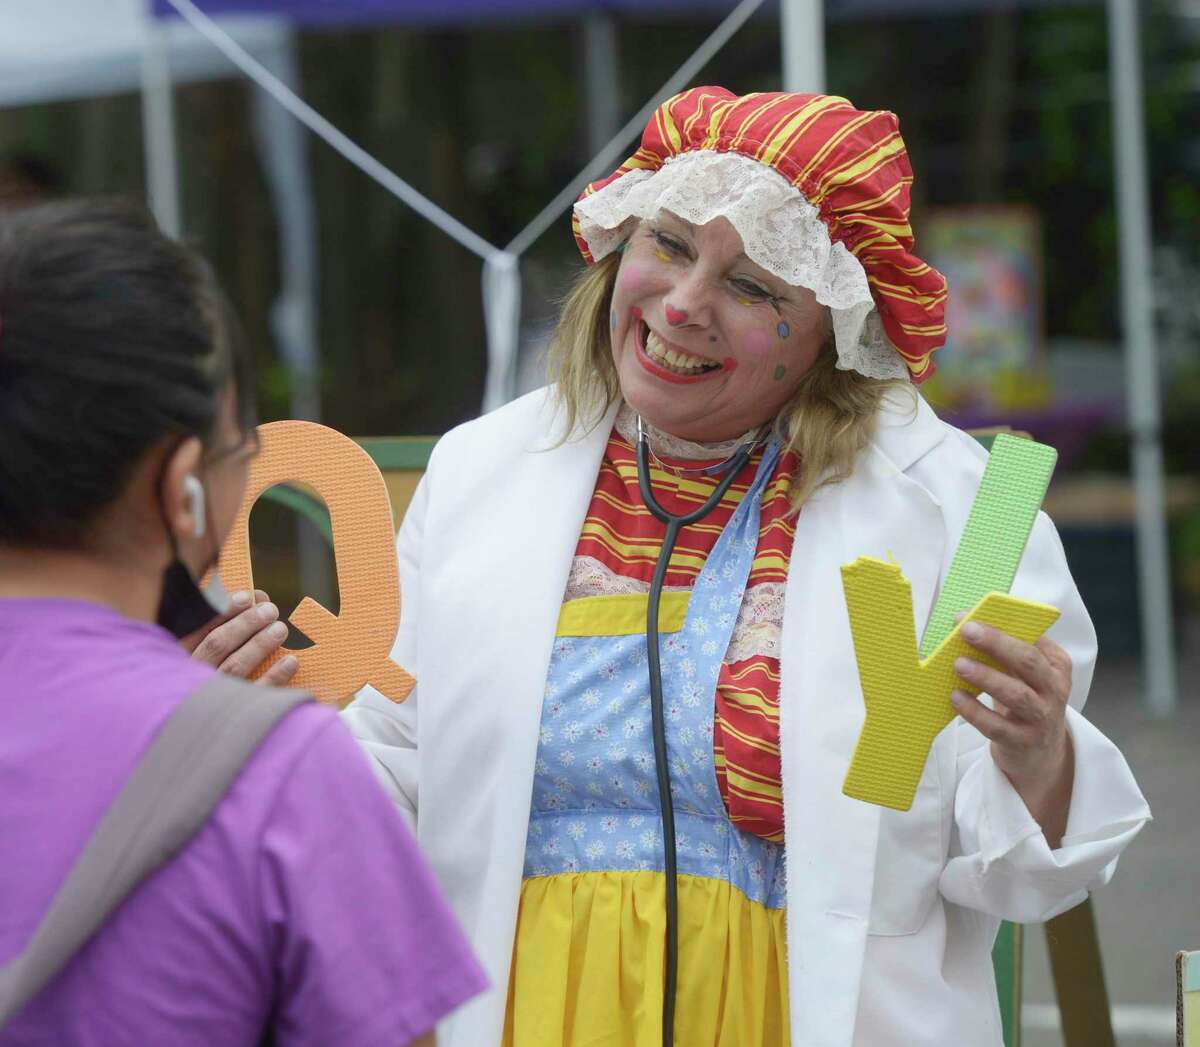 Janina Radachowsky or Ms Bubbles the Clown entertained at the Connecticut Institute for Communities Community Health Fair, part of National Health Center Week. The event will be held in the parking lot of the Danbury Community Center. Wednesday, August 10, 2022, Danbury, Conn.